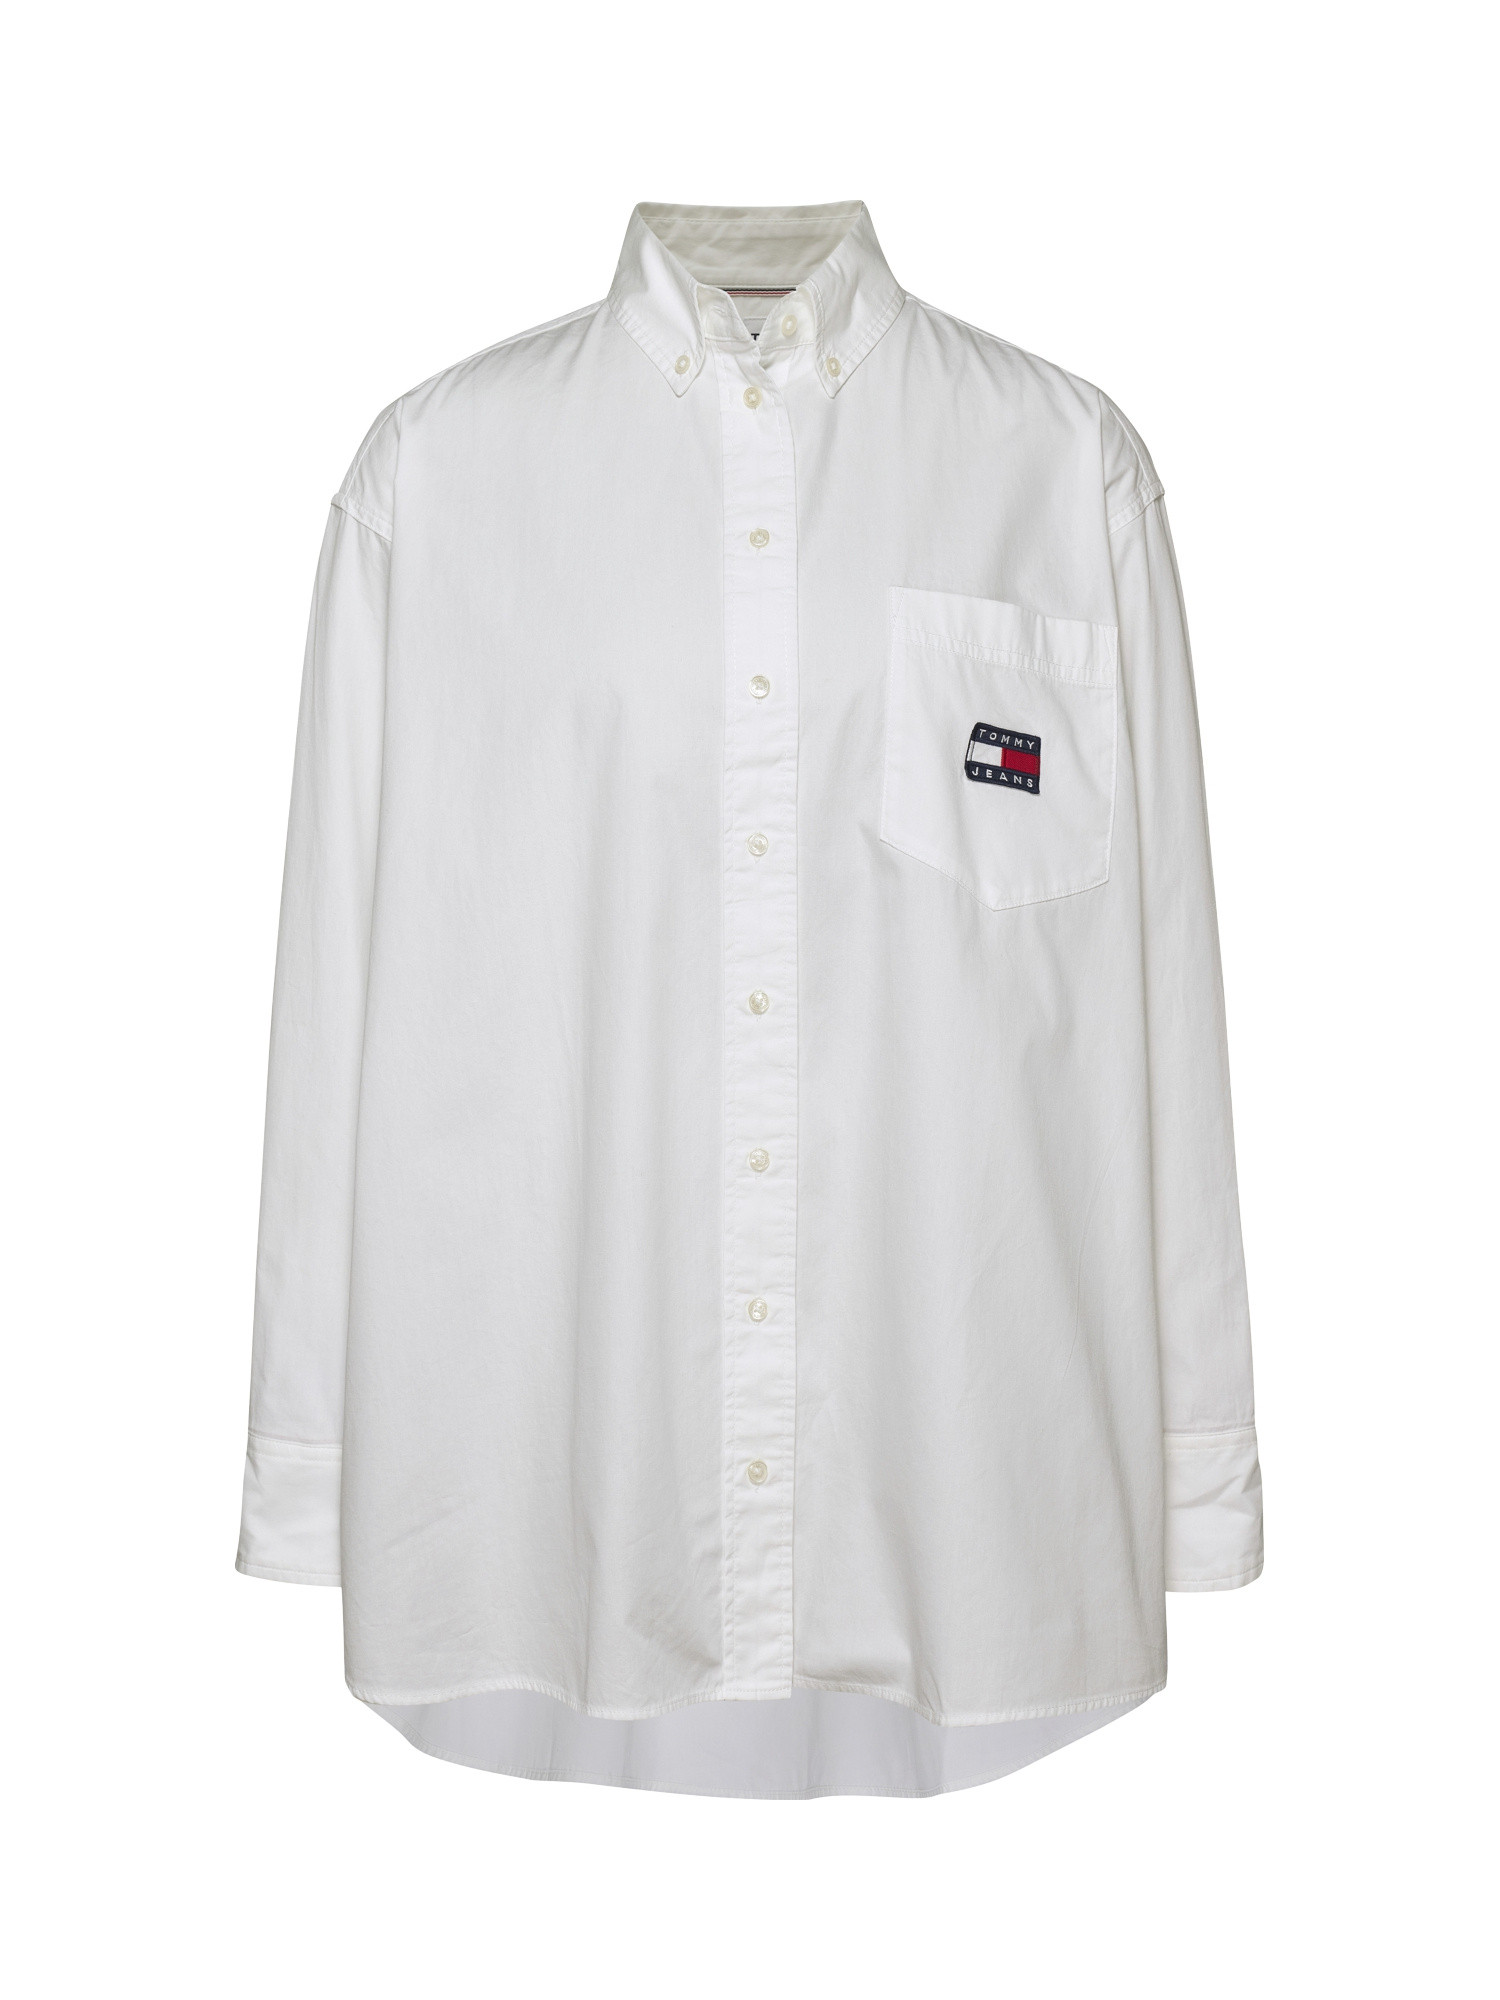 Tommy Jeans - Camicia oversize con logo in cotone, Bianco, large image number 0